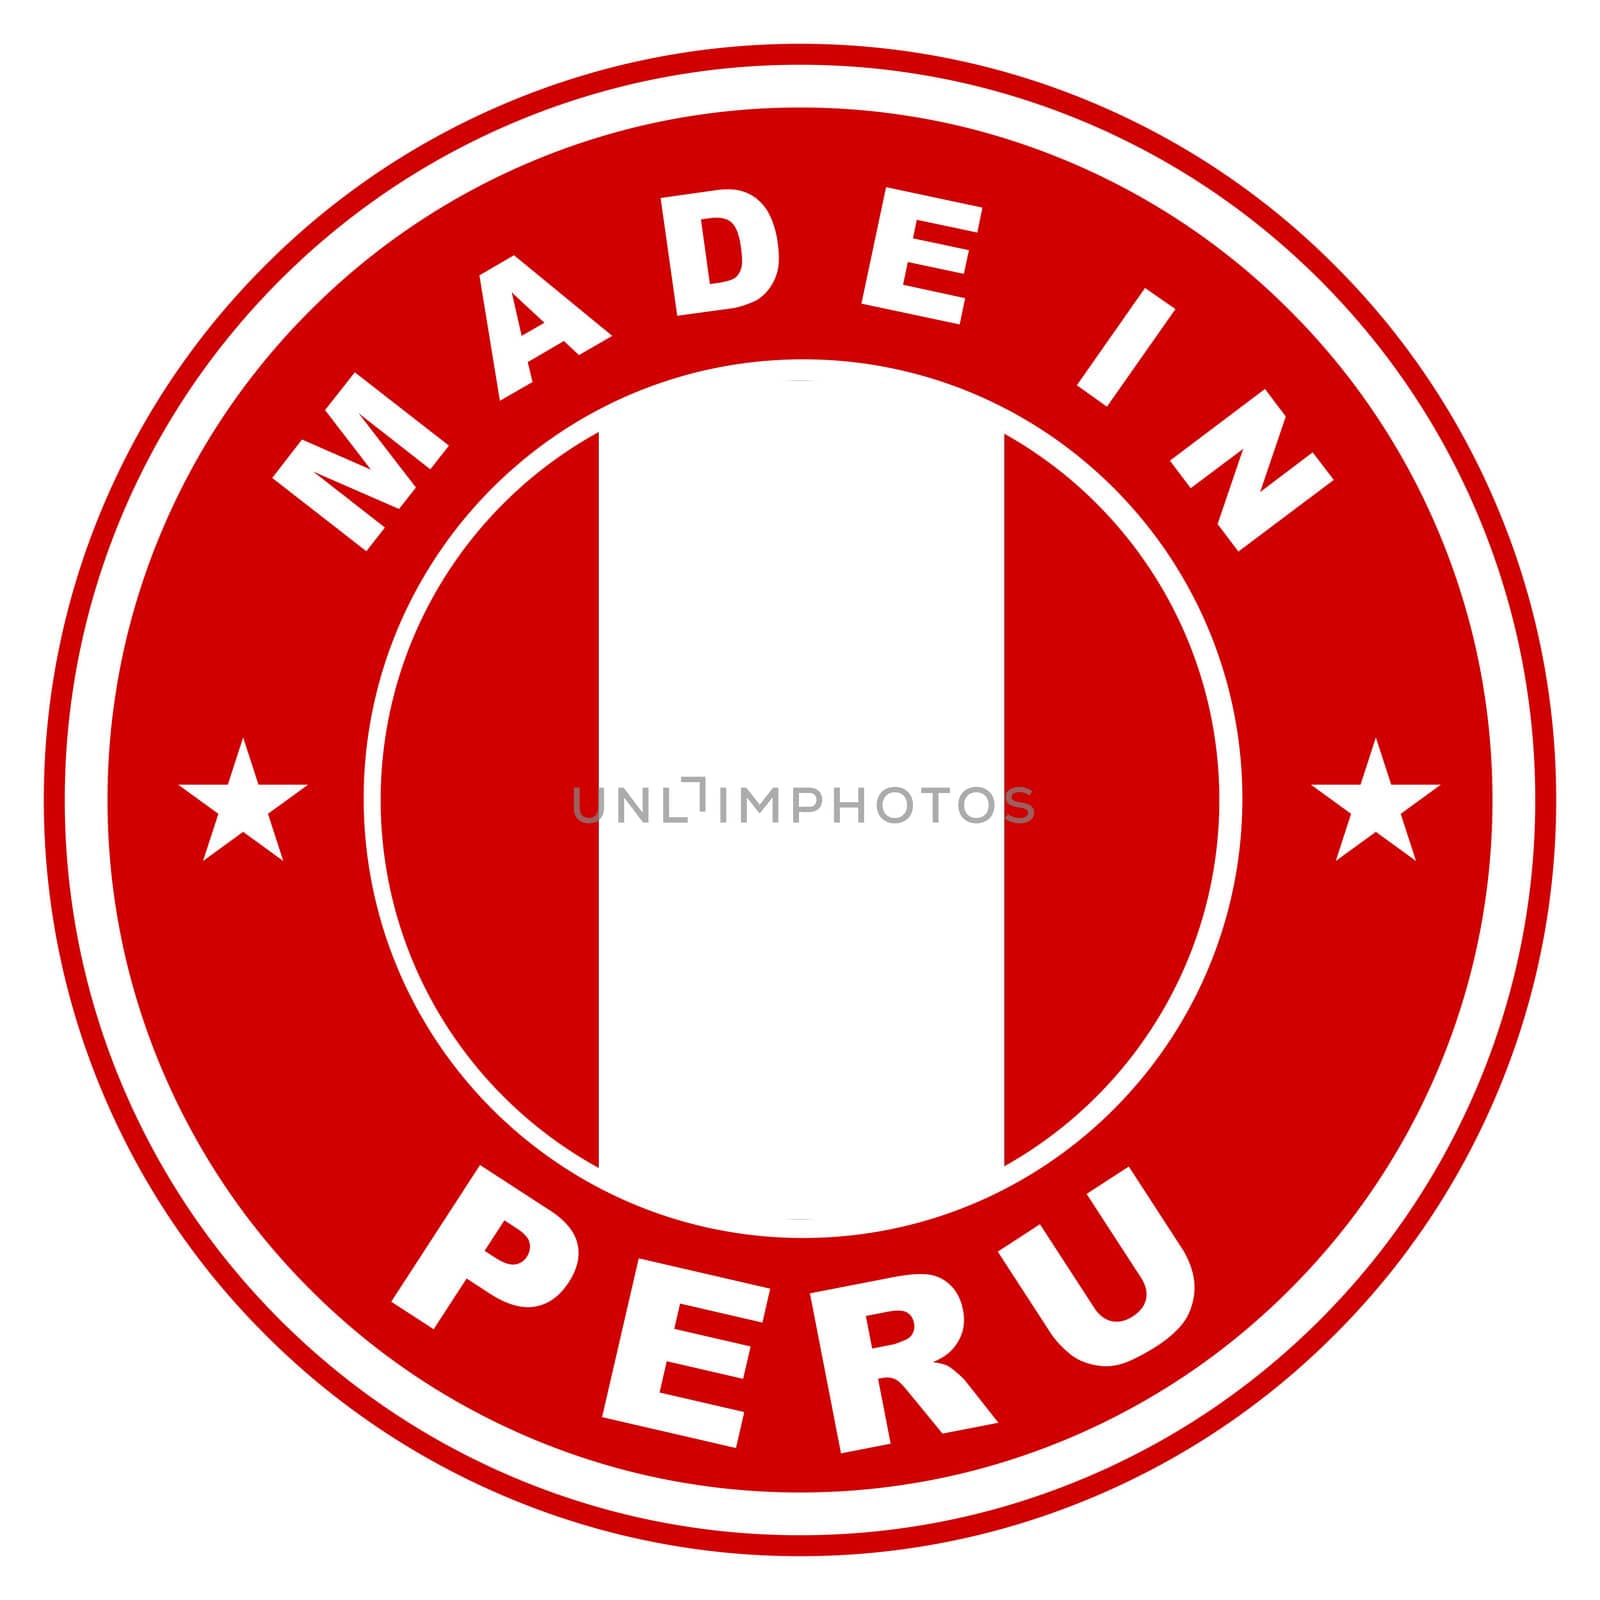 very big size made in peru country label